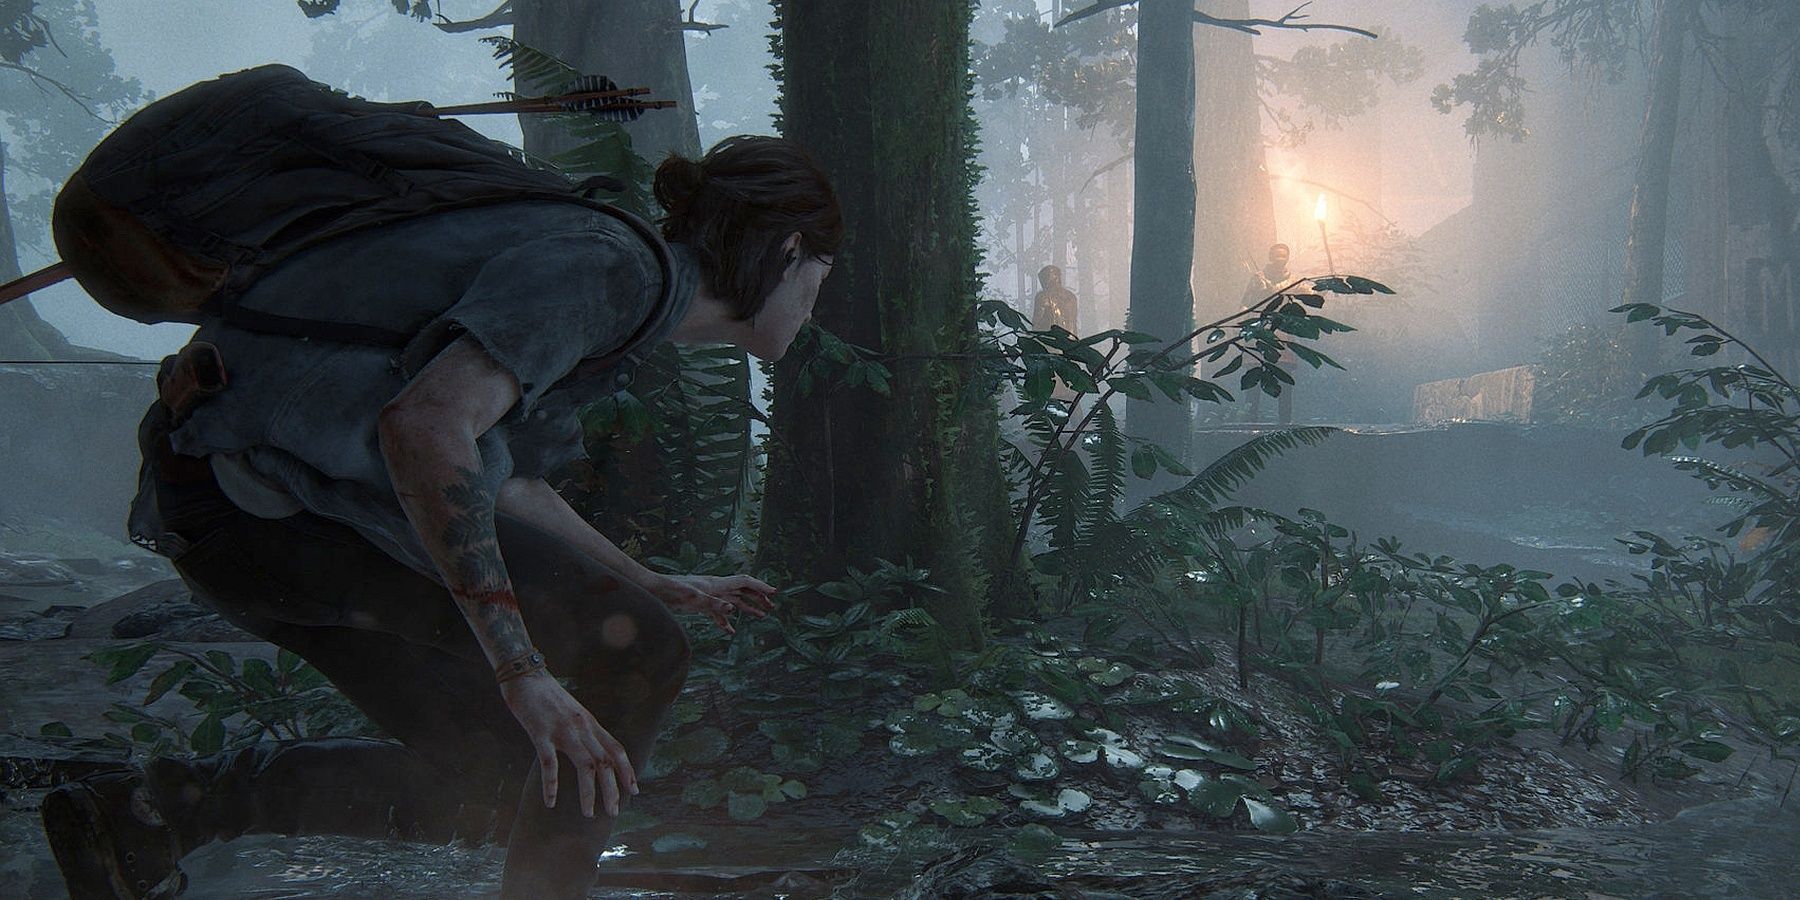 Ellie crouched behind a tree in The Last of Us Part II